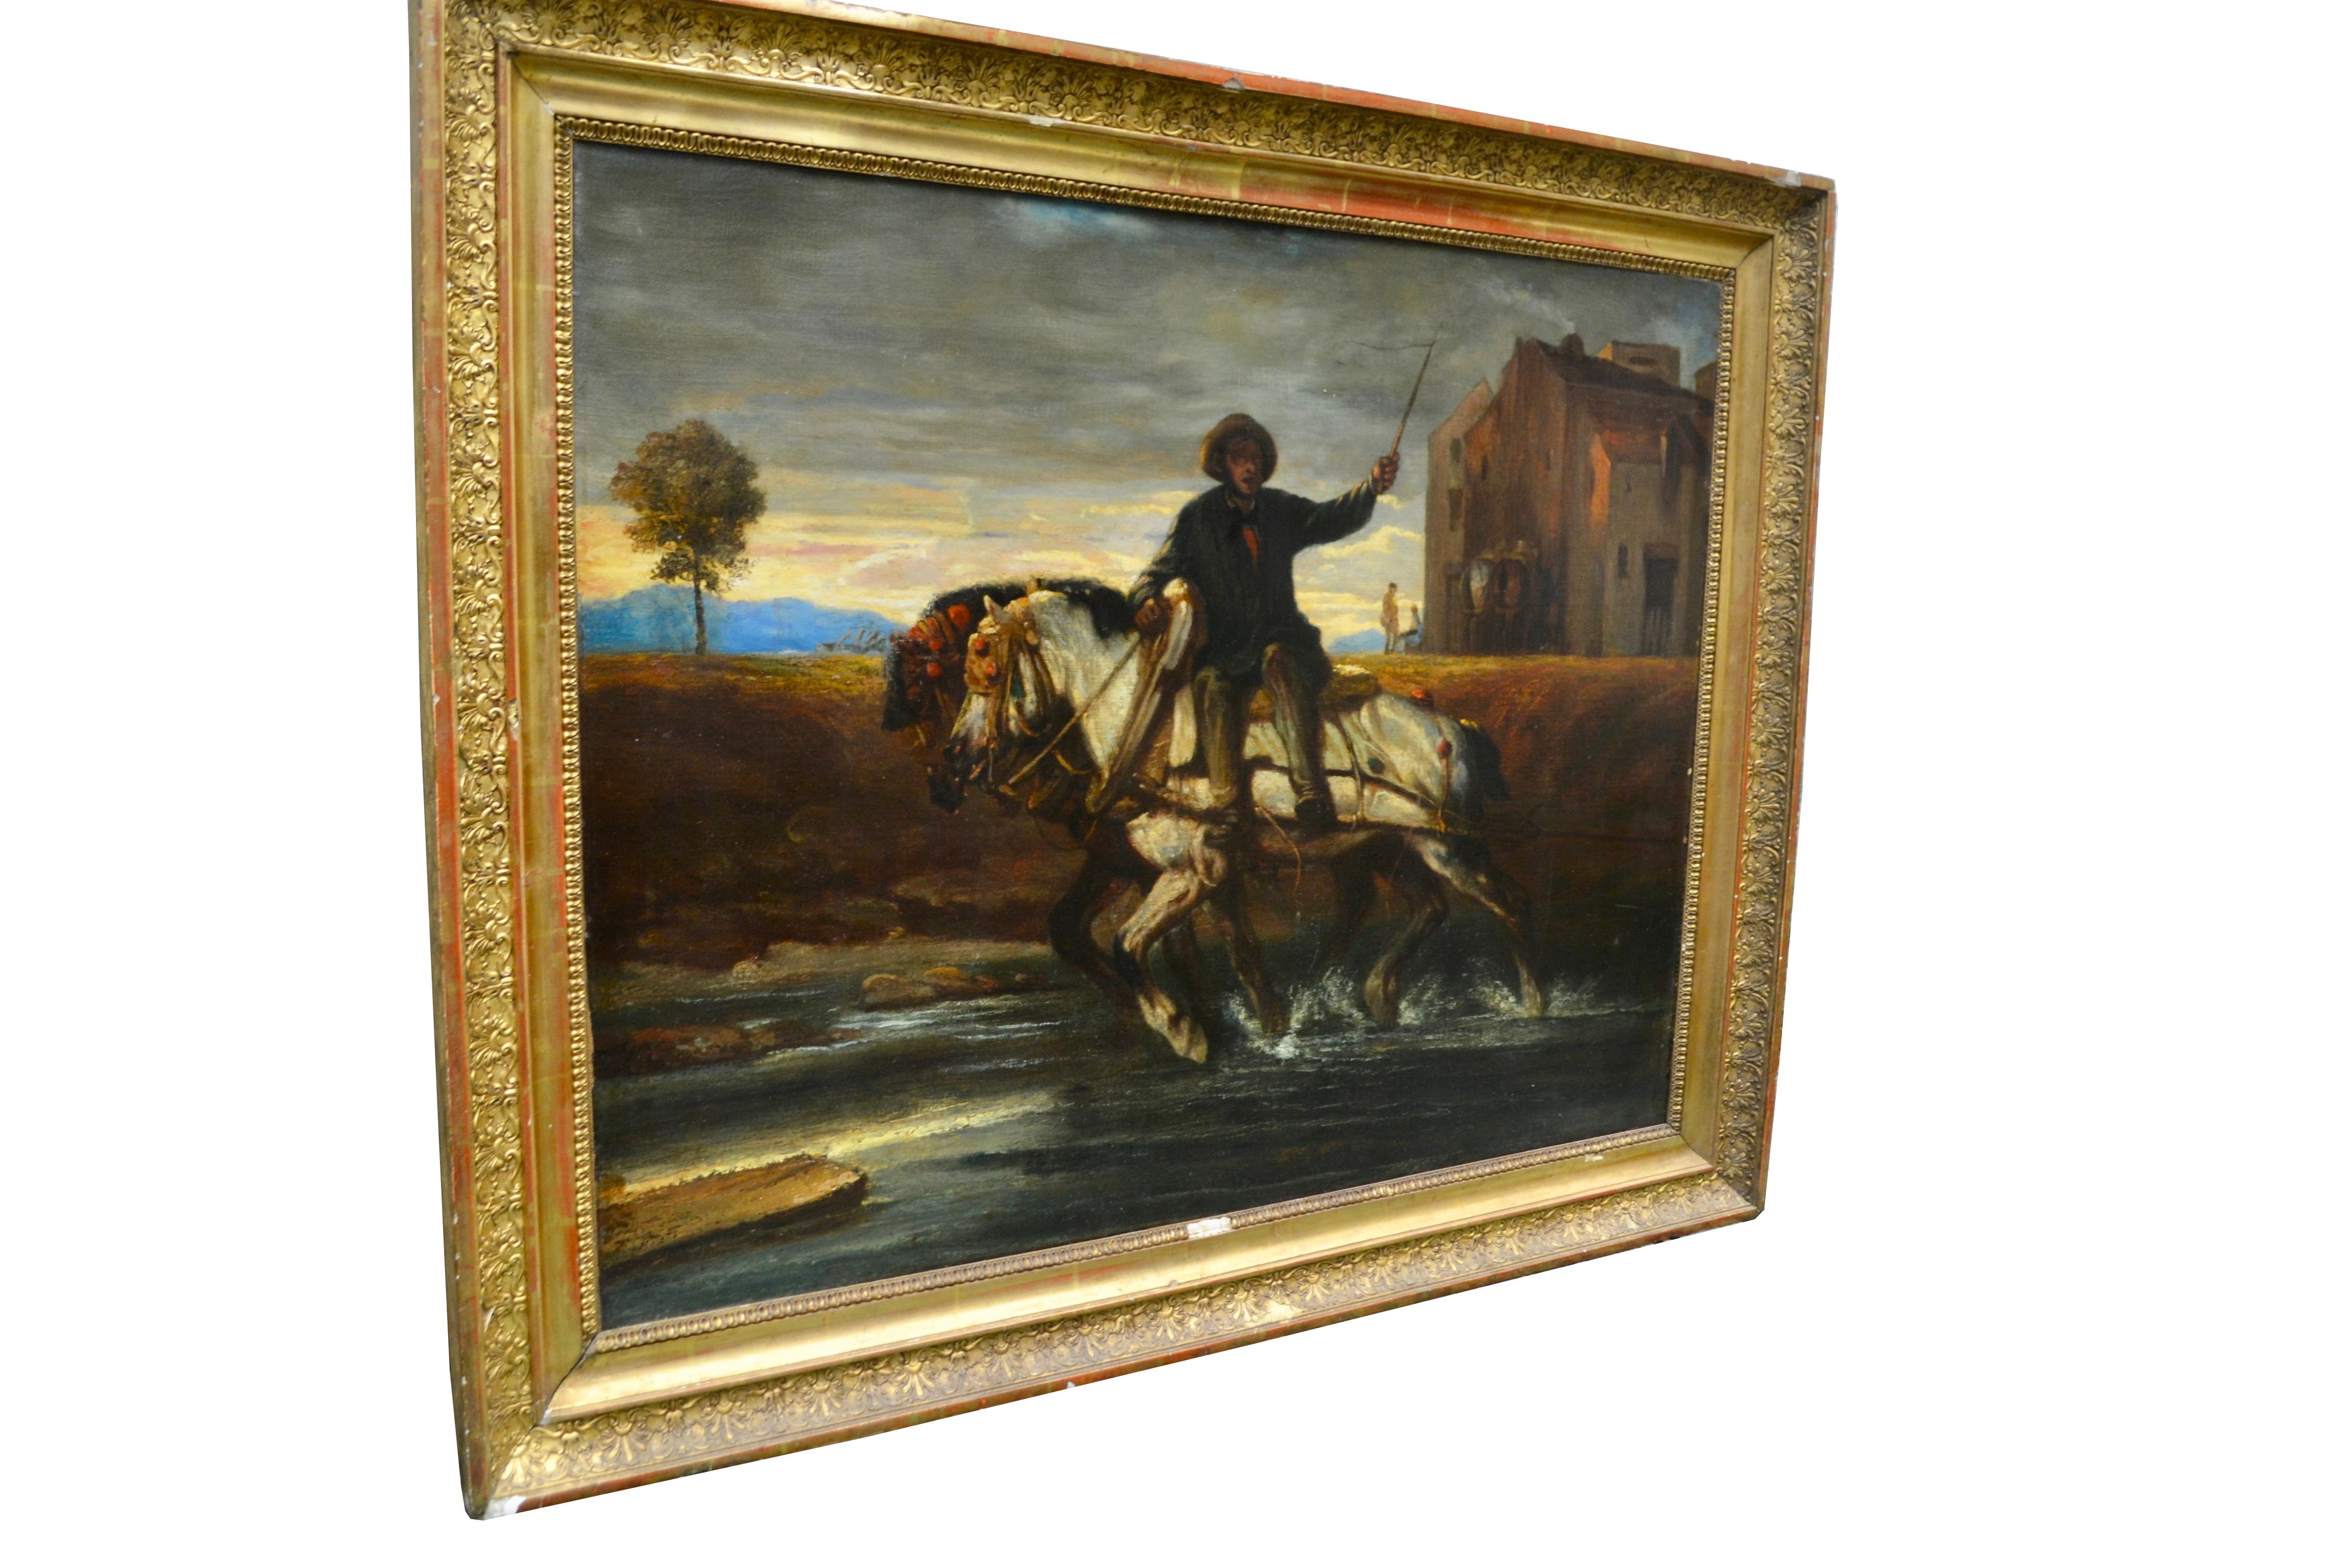 A farming scene depicting a man sitting side-saddle on his white horse with a riding crop in his left hand. There are actually two horses (he sitting on one) and likely they are pulling a cart through a river stream. The rather dark foreground is